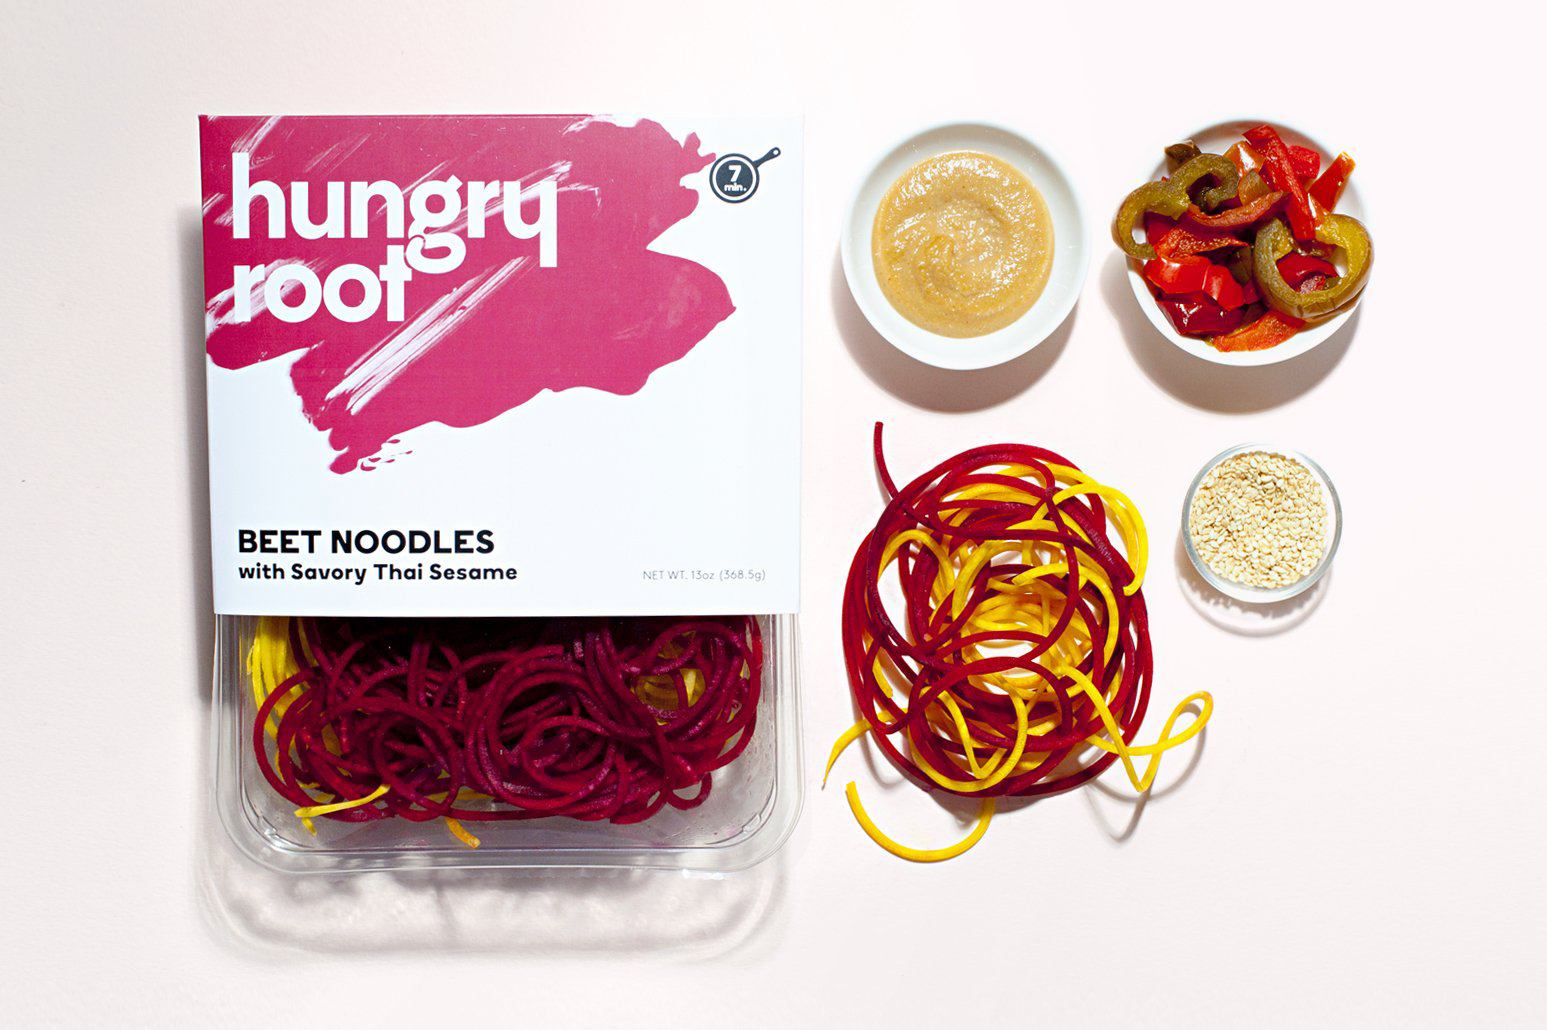 Hungry root healthy fast-food